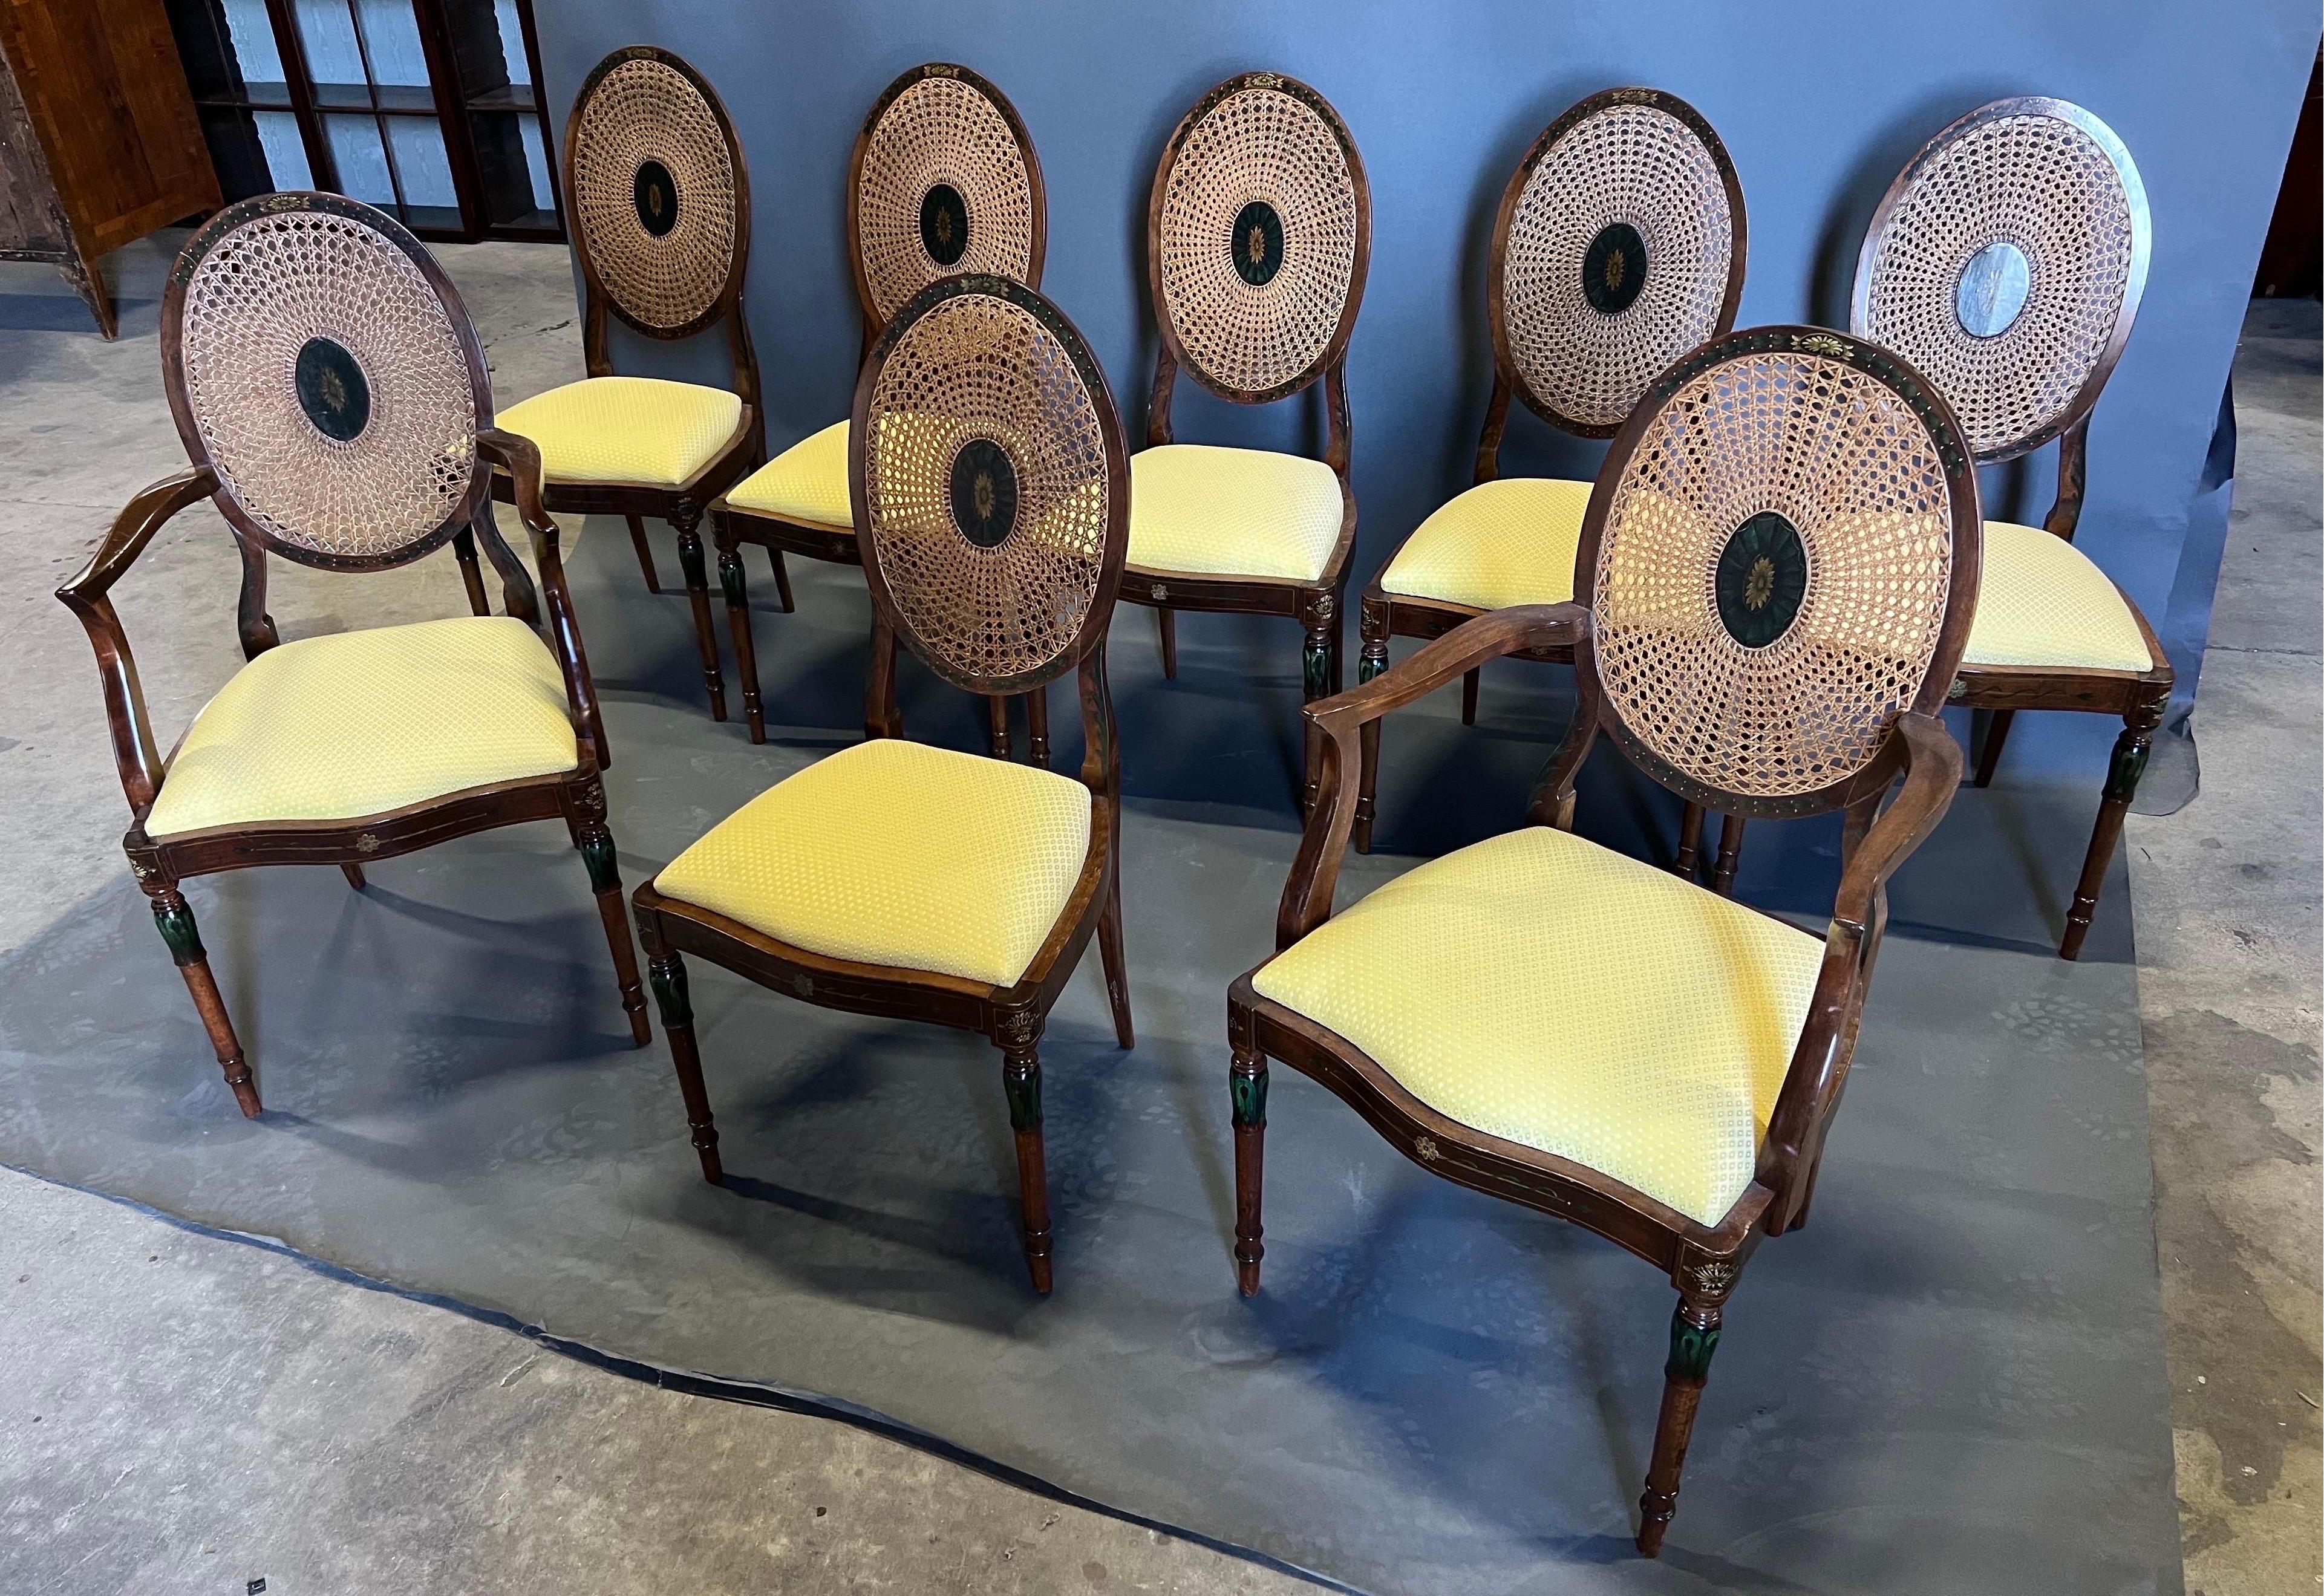 Very pretty and elegant set of 8 adams style dining chairs made of satinwood with cane backs and hand painted decoration. Cane is in great condition on all chairs and the slip seats are upholstered in an attractive yellow fabric but could easily be